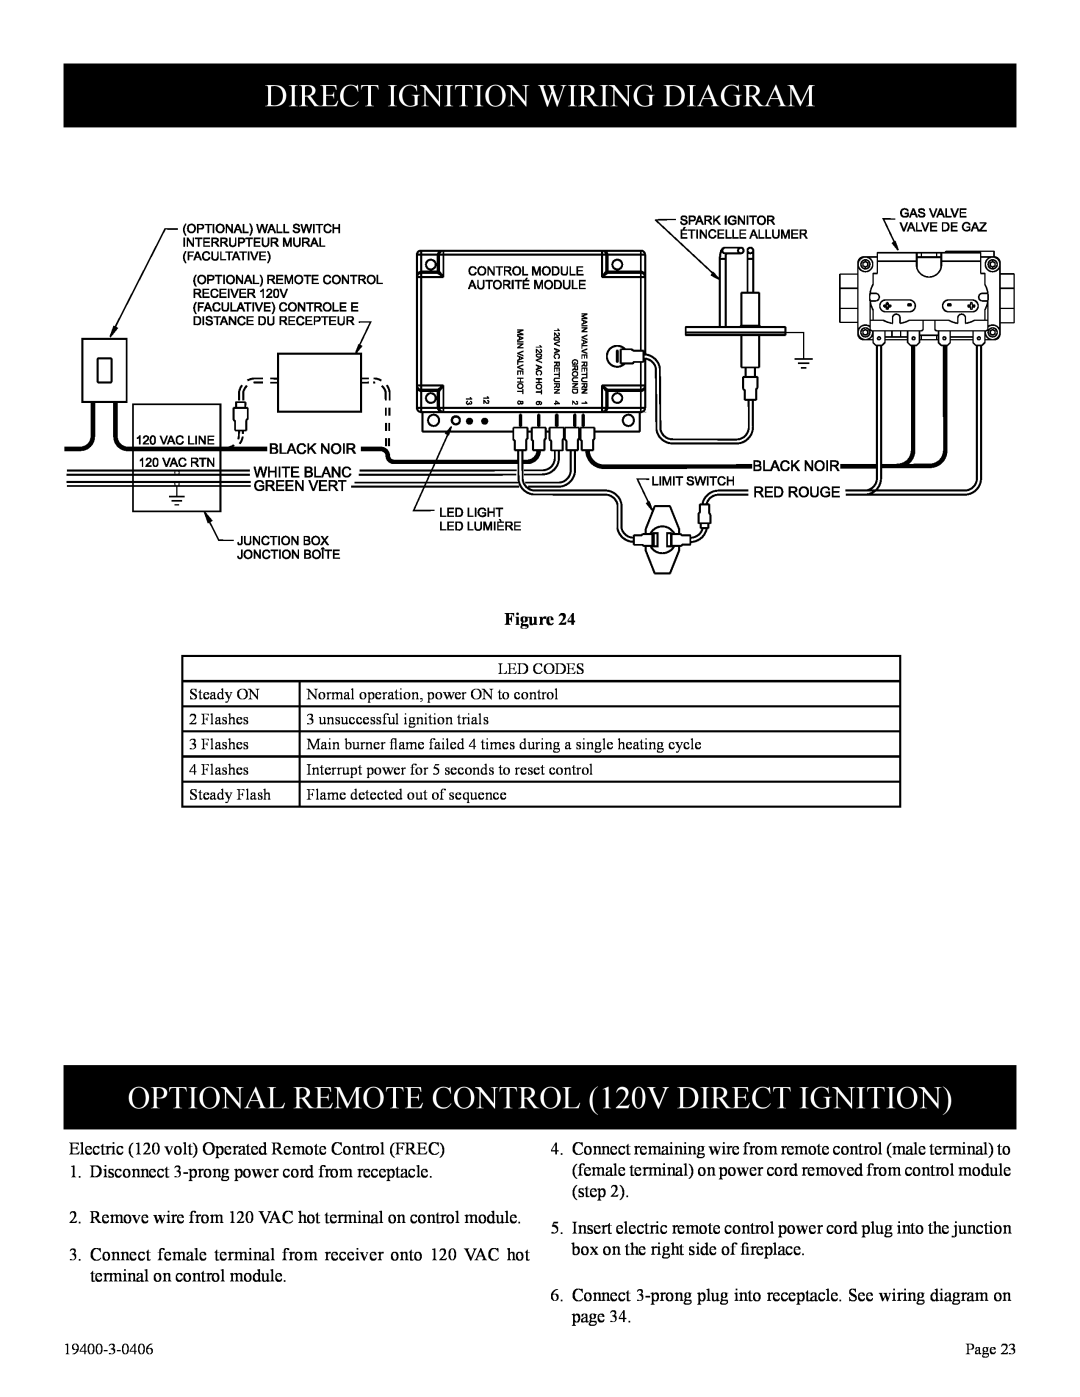 Vulcan-Hart BVD34FP30(F,L)N-1 Direct Ignition Wiring Diagram, OPTIONAL REMOTE CONTROL 120V DIRECT IGNITION 